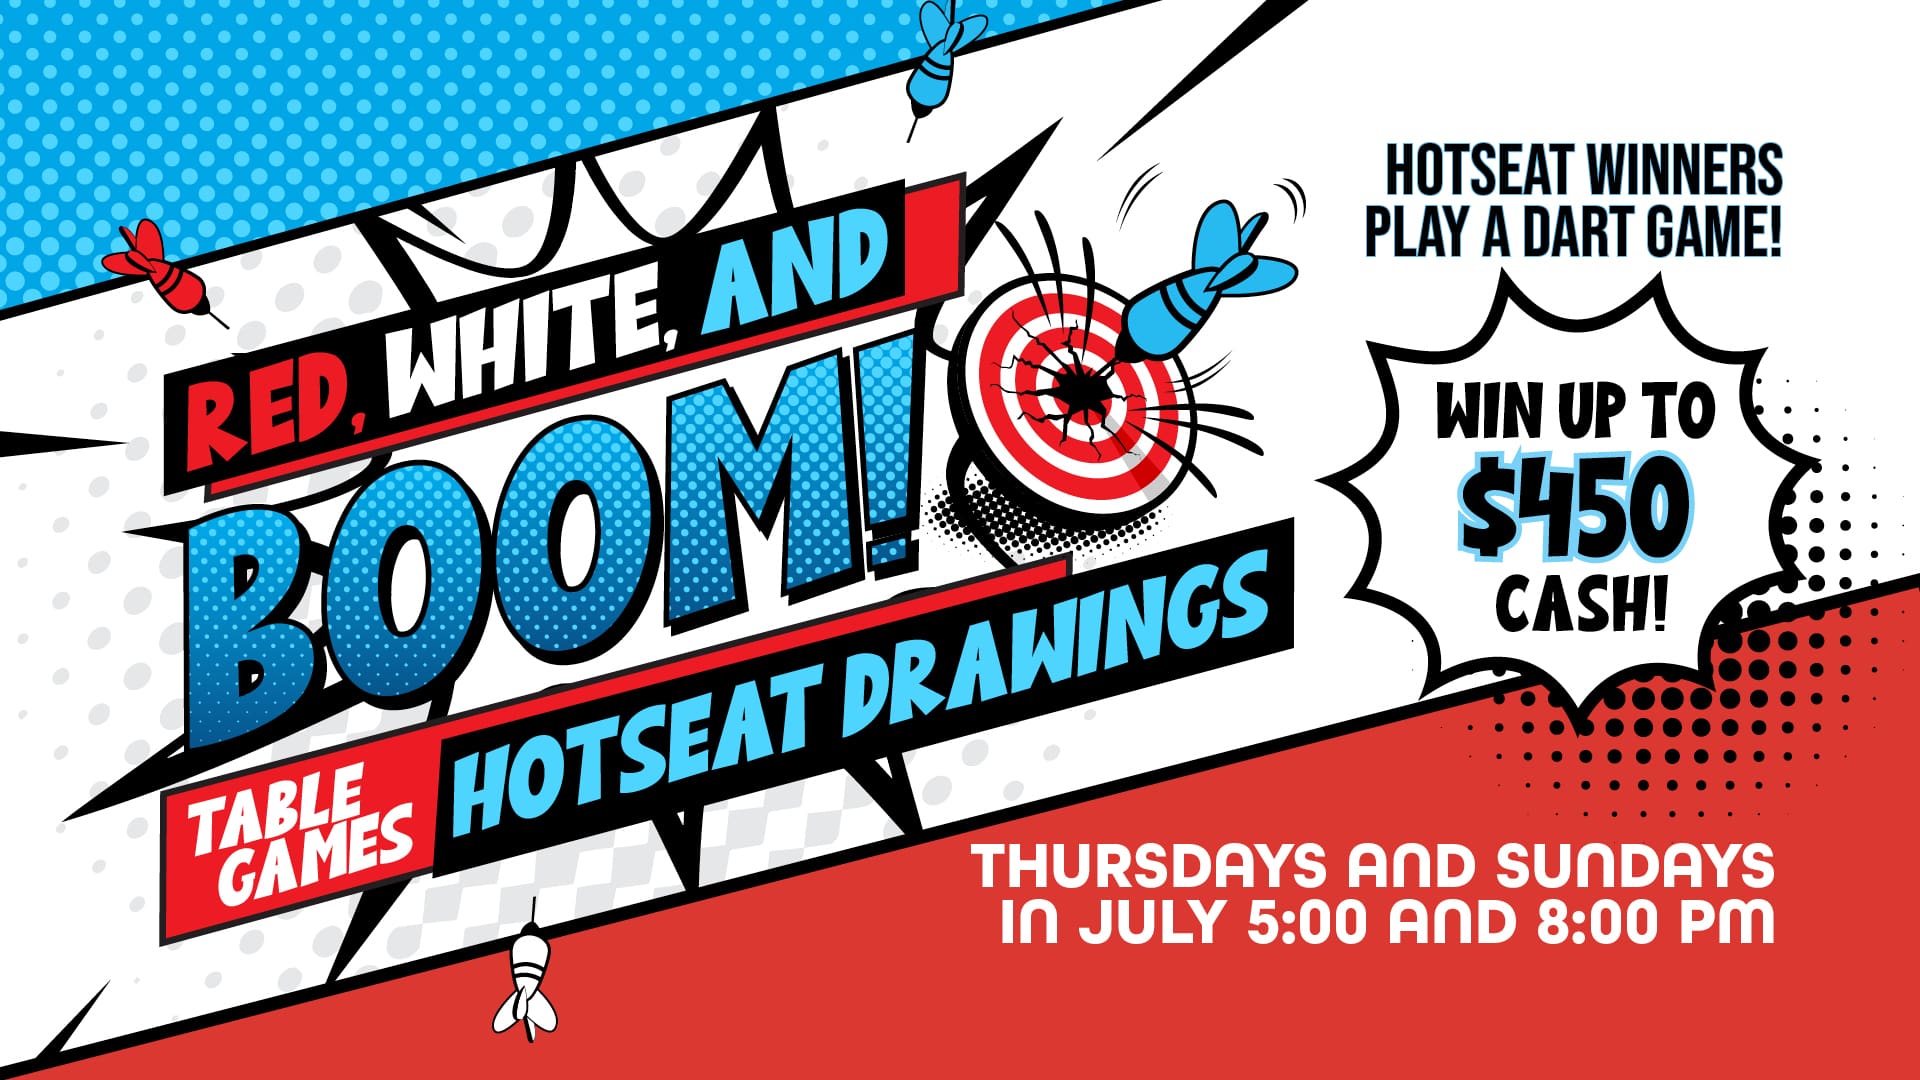 Red, White, and Boom Table Games Hotseat Drawing